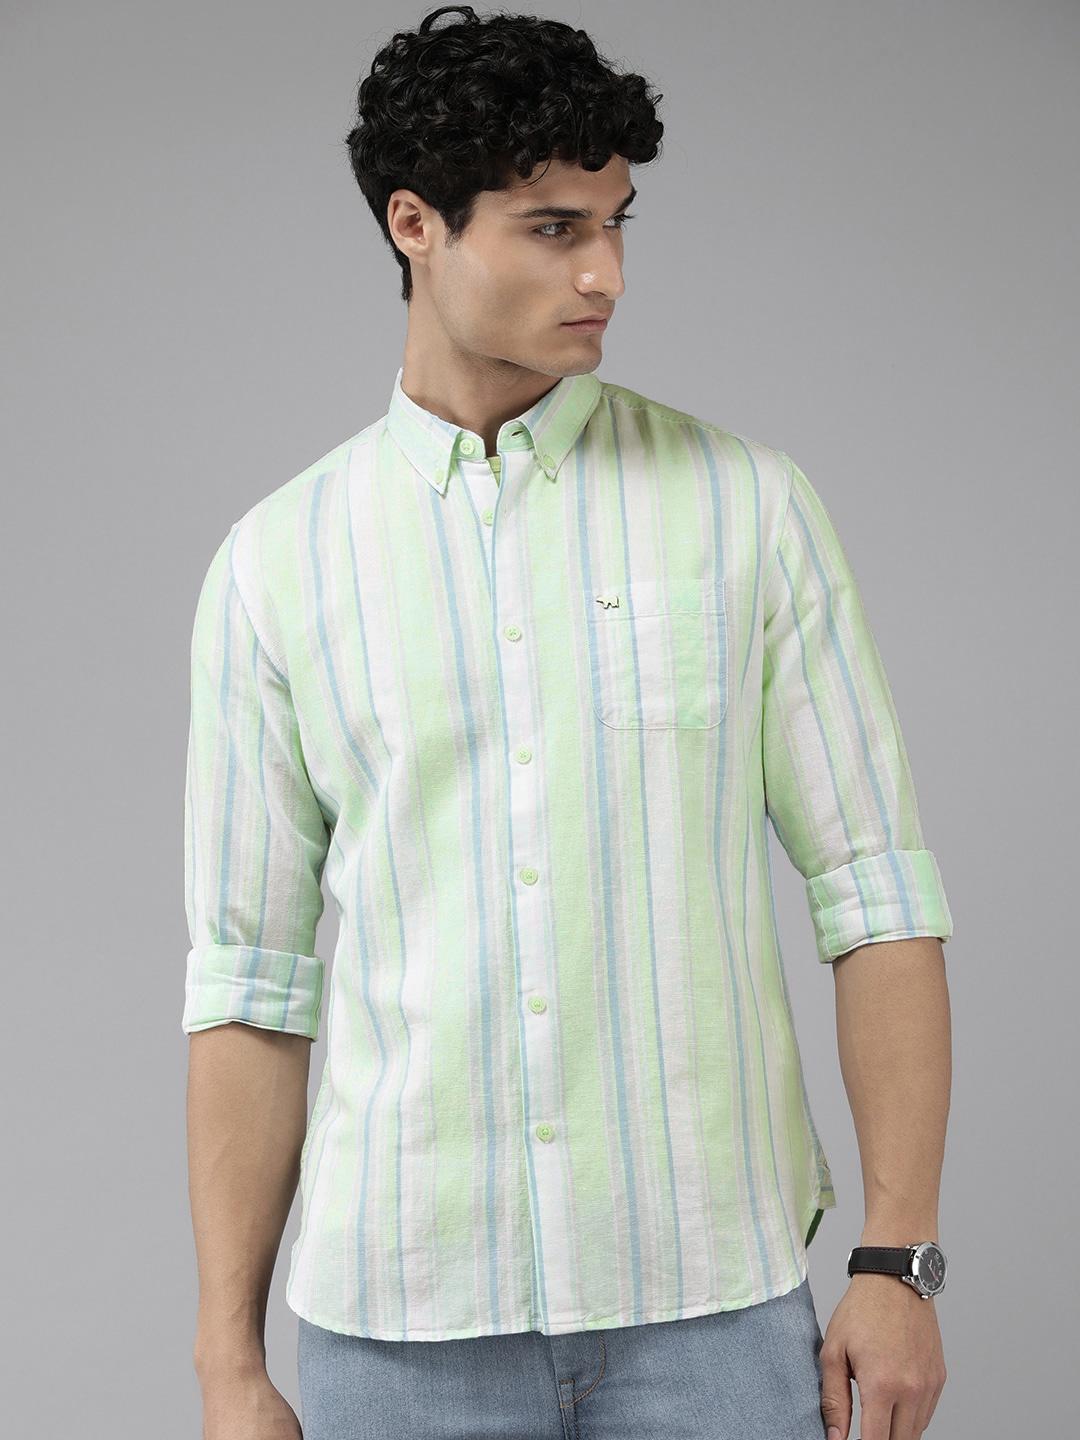 the-bear-house-slim-fit-striped-casual-shirt